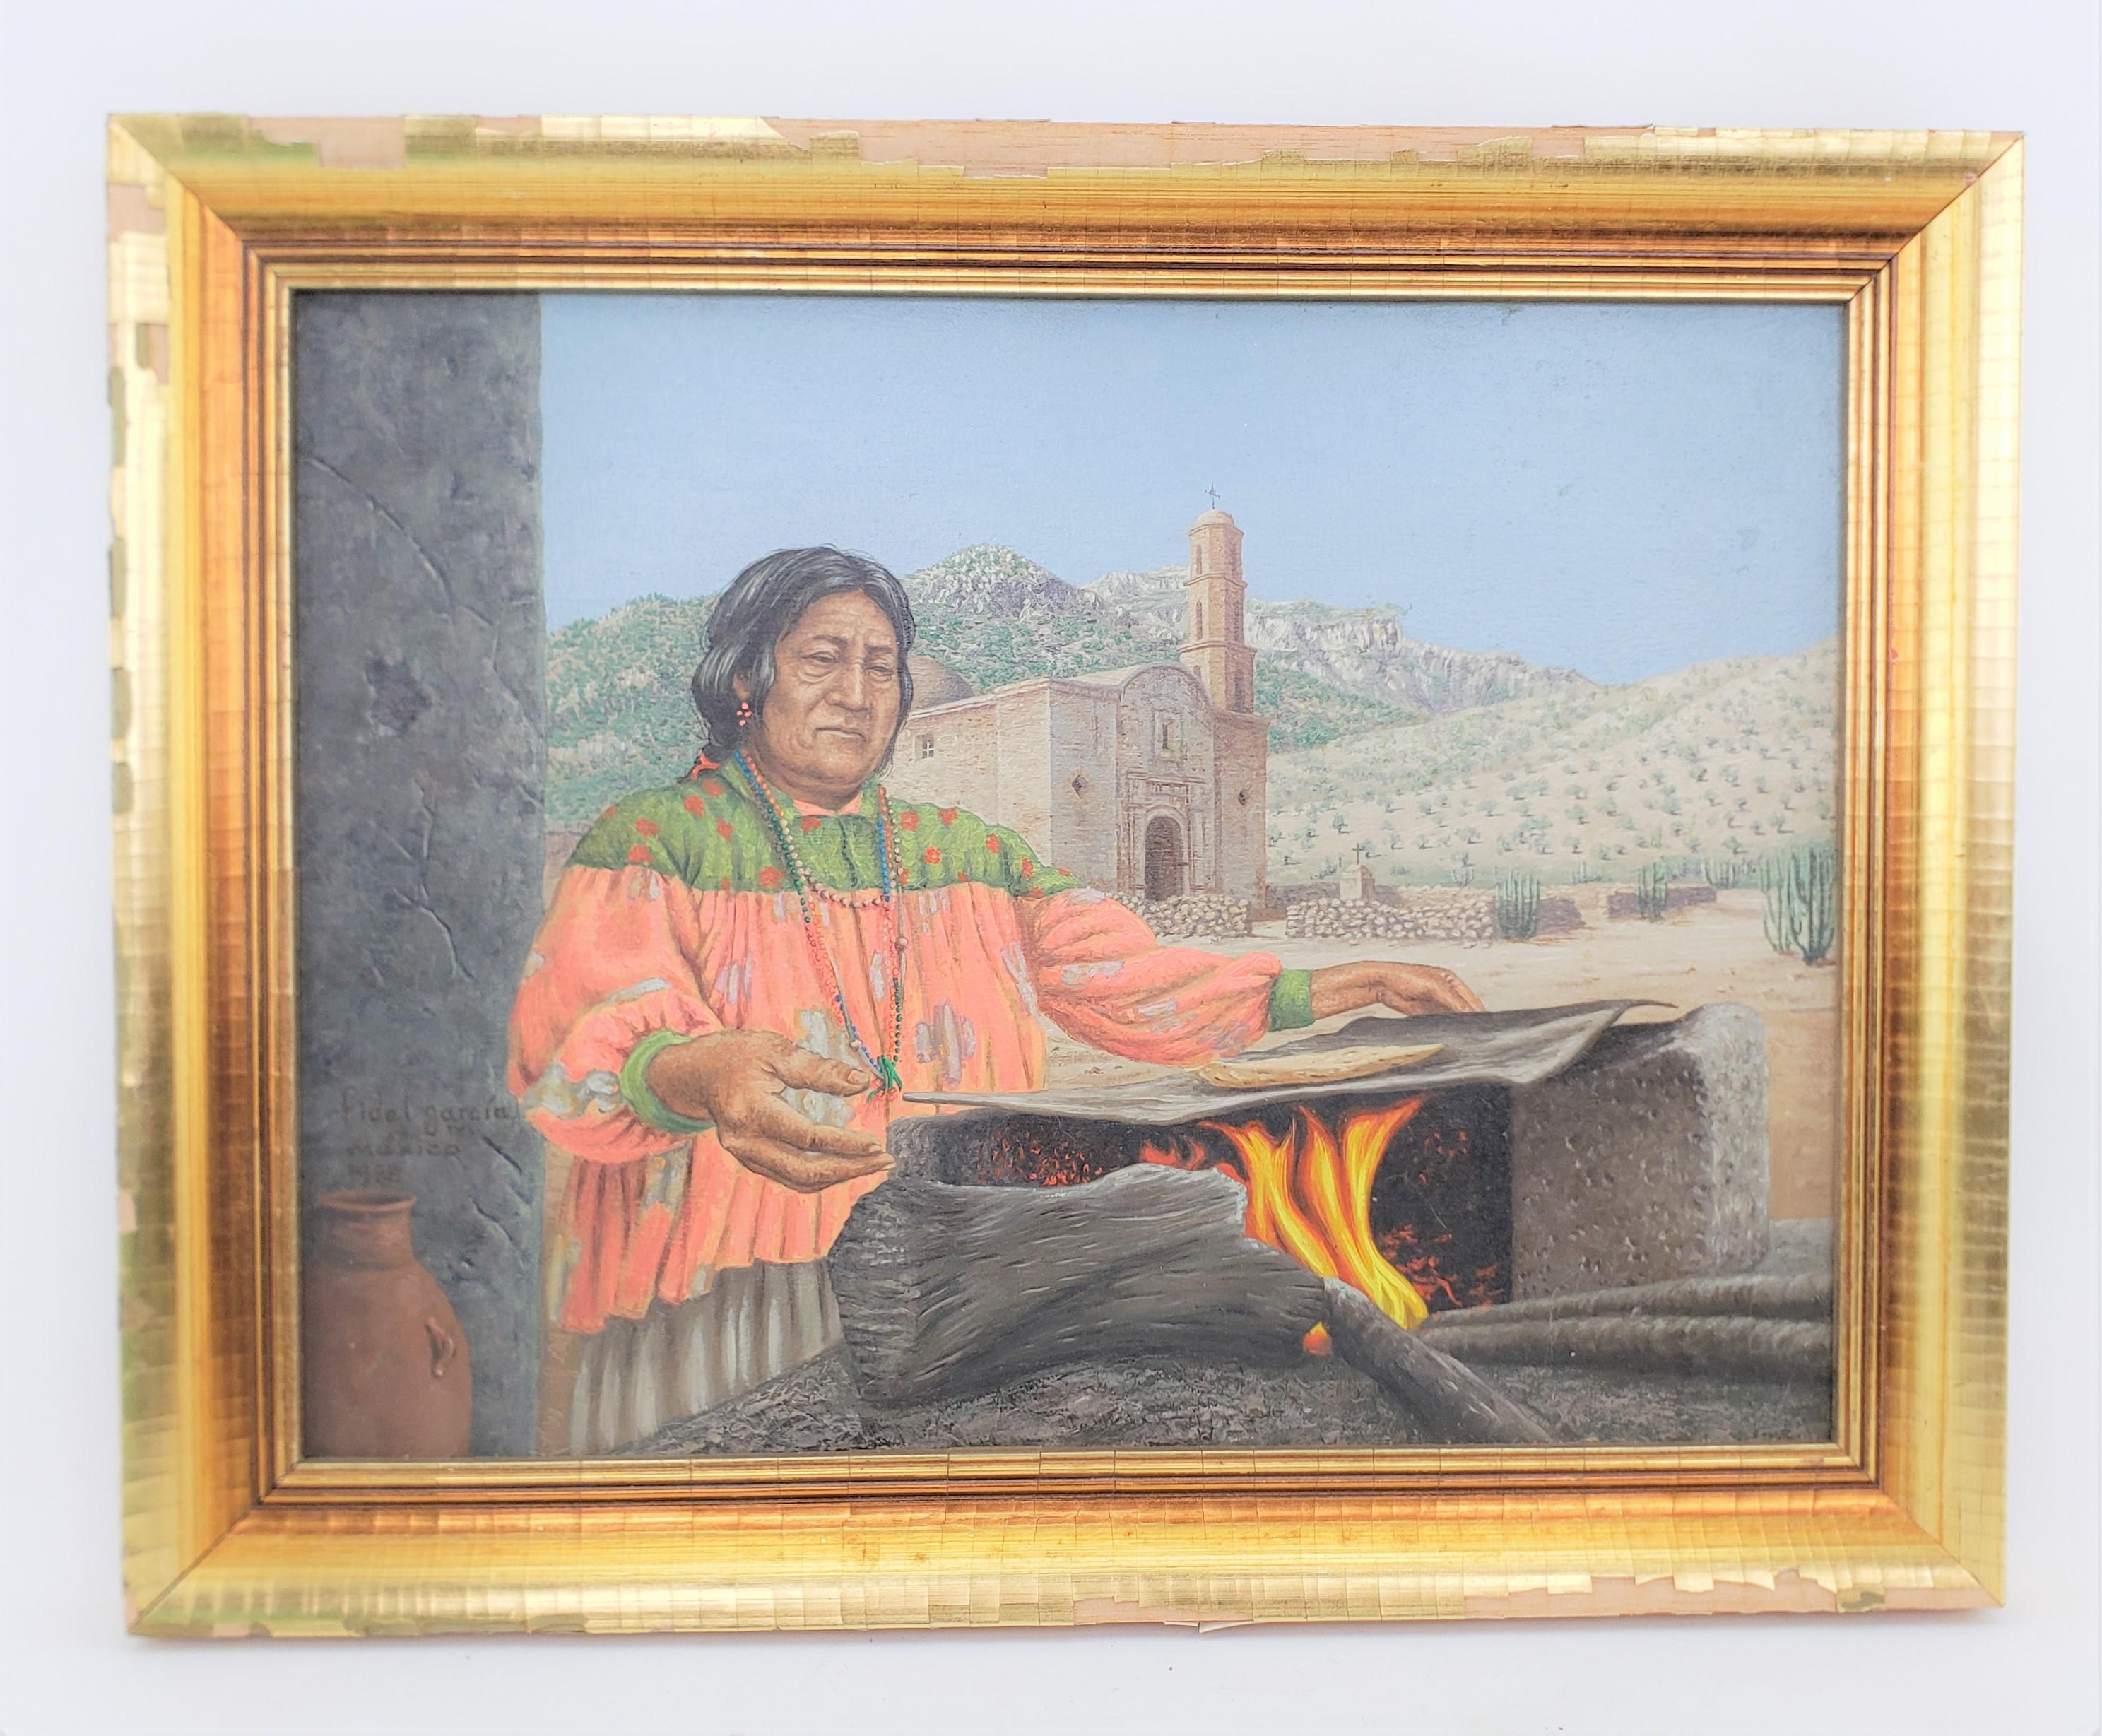 This original painting was done by Fidel Garcia M. of Mexico in 1988 in a realistic style. The painting is done on canvas and depicts an indigenous Mexican cooking outdoors over an open fire. The painting is titled: 